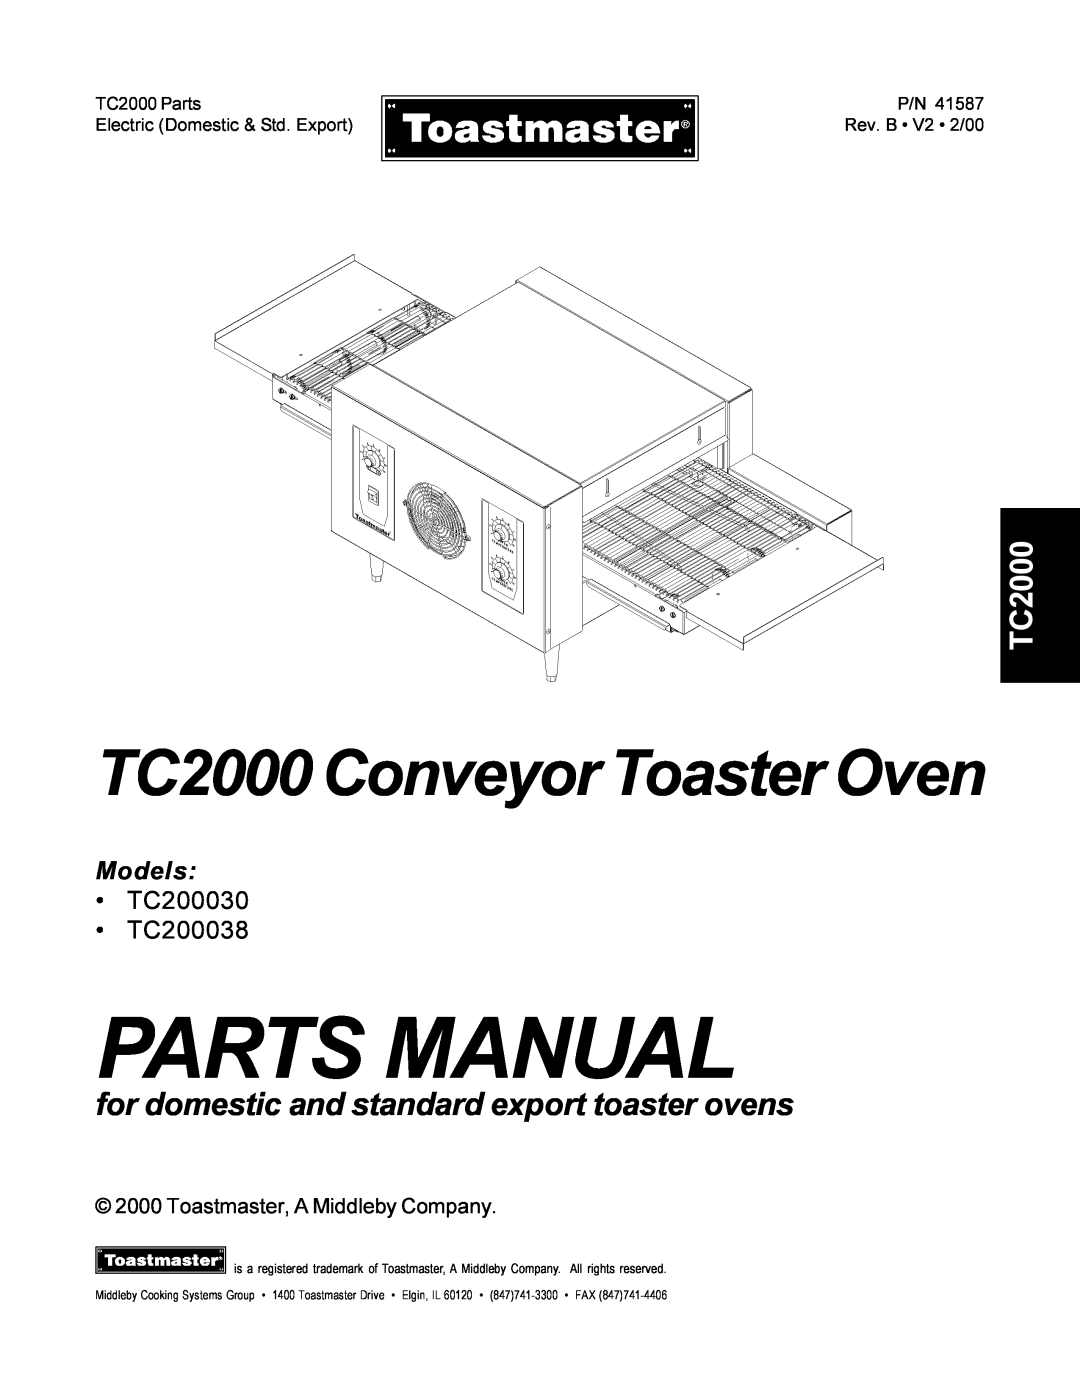 Toastmaster TC200030 manual Parts Manual, TC2000 Conveyor Toaster Oven, for domestic and standard export toaster ovens 